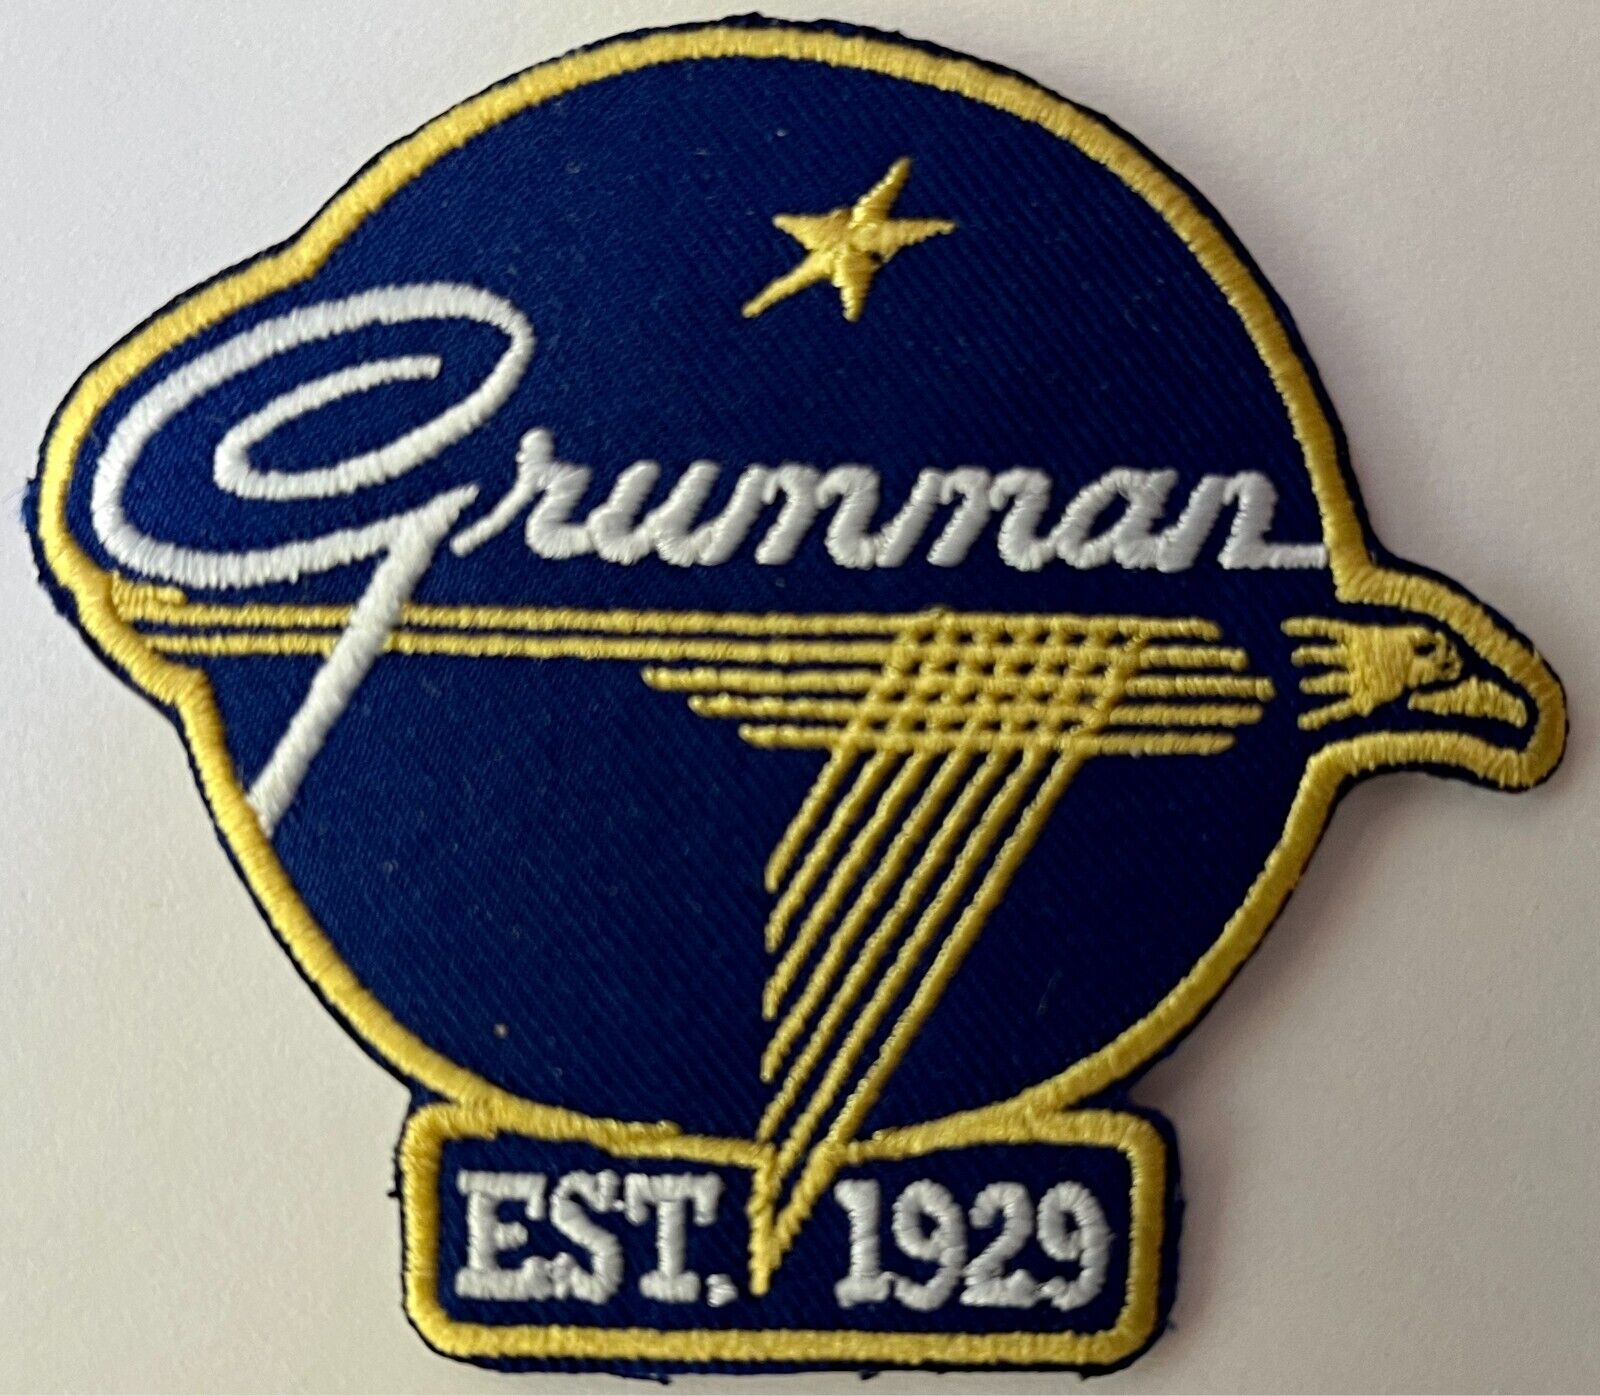 Grumman Embroidered Patch, Vintage Aviation, WWII Aircraft  PAT-0152